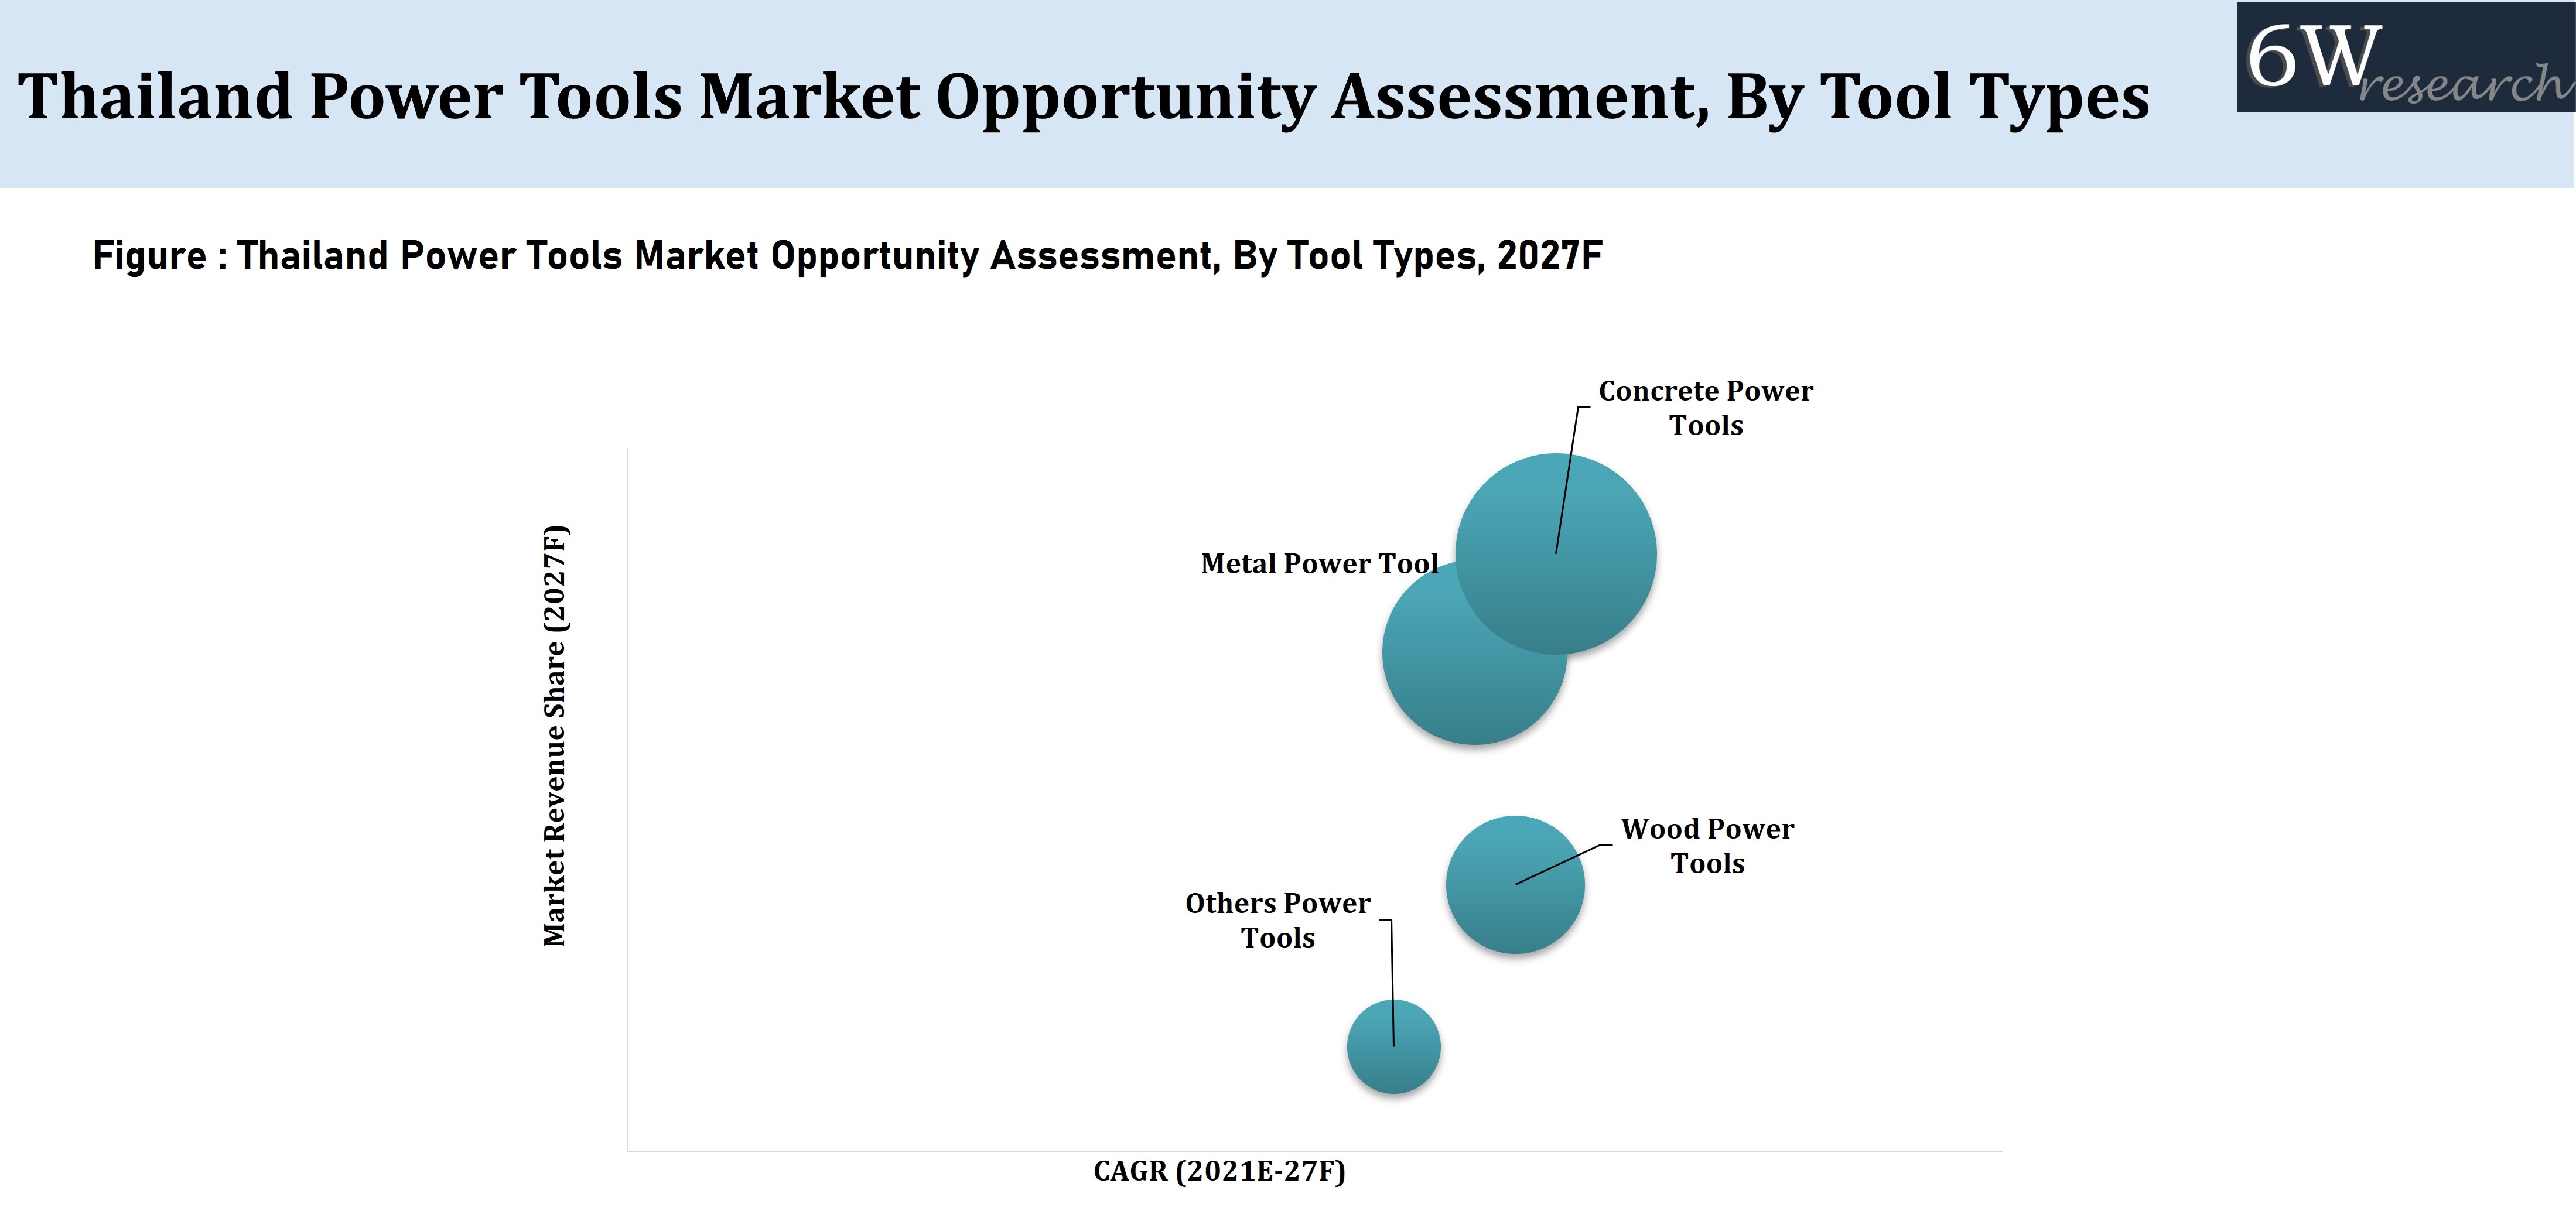 Thailand Power Tools Market Opportunity Assessment